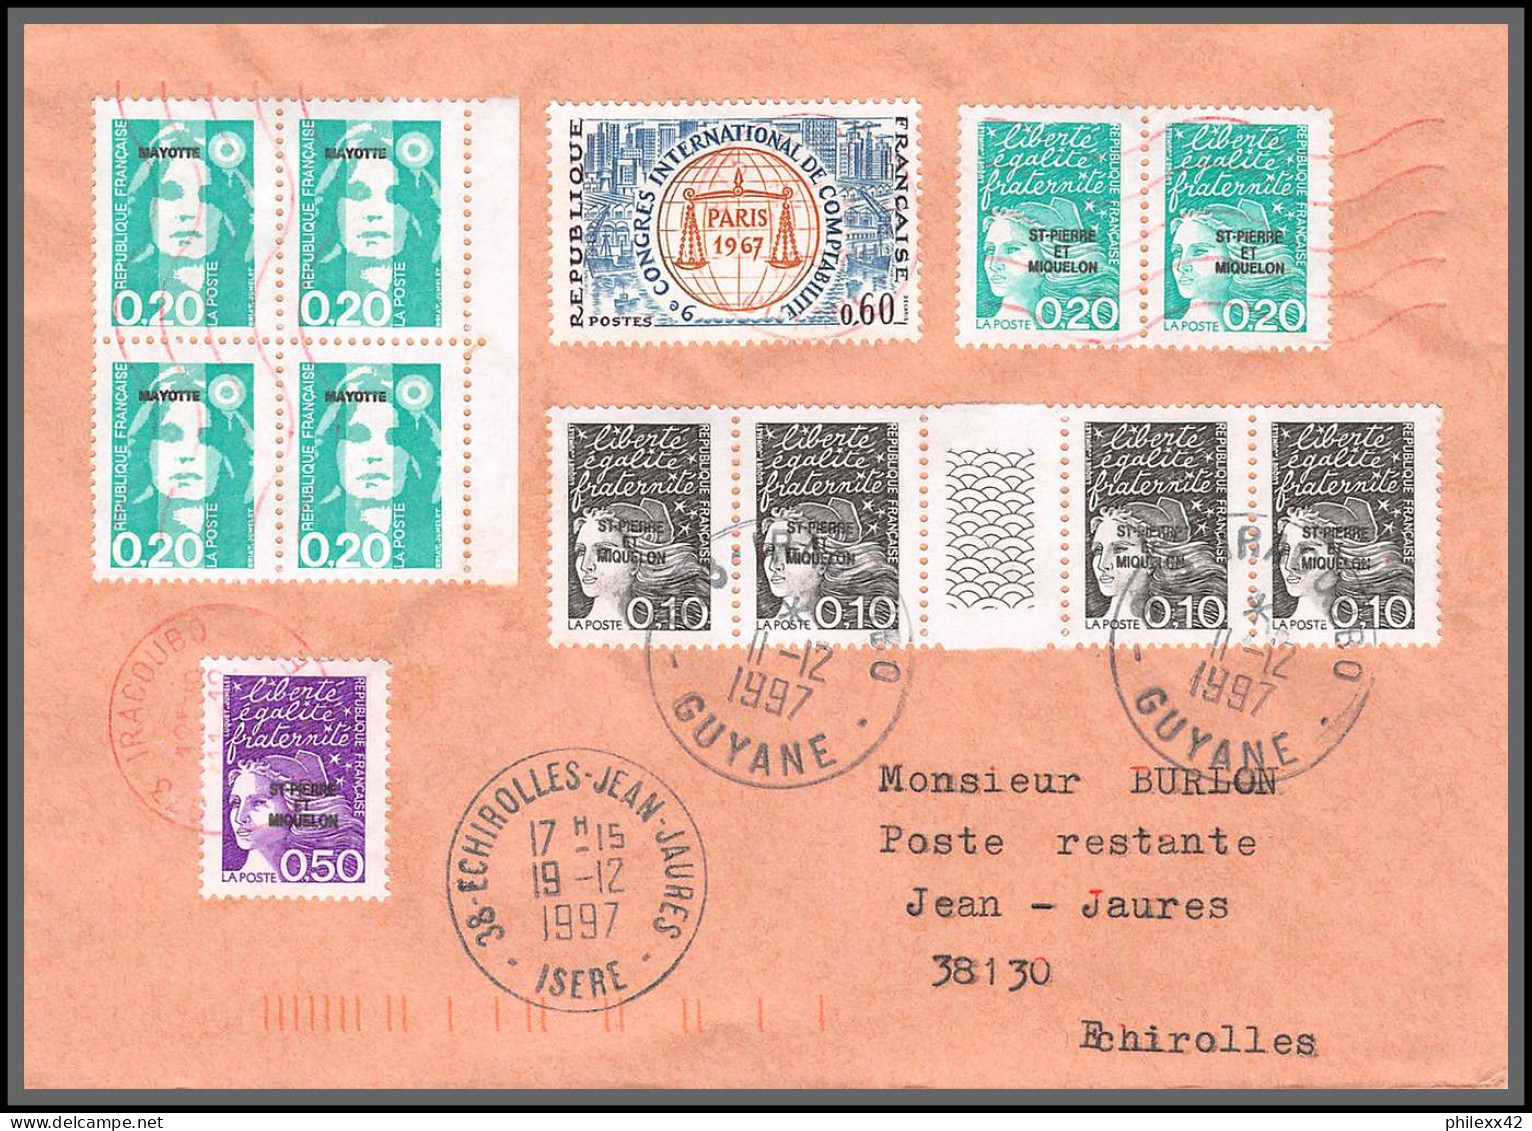 74486 Mixte Briat Luquet Mayotte St Pierre 11/12/1997 Iracoubo Guyane Echirolles Isère Lettre Cover Colonies - 1997-2004 Marianne (14. Juli)